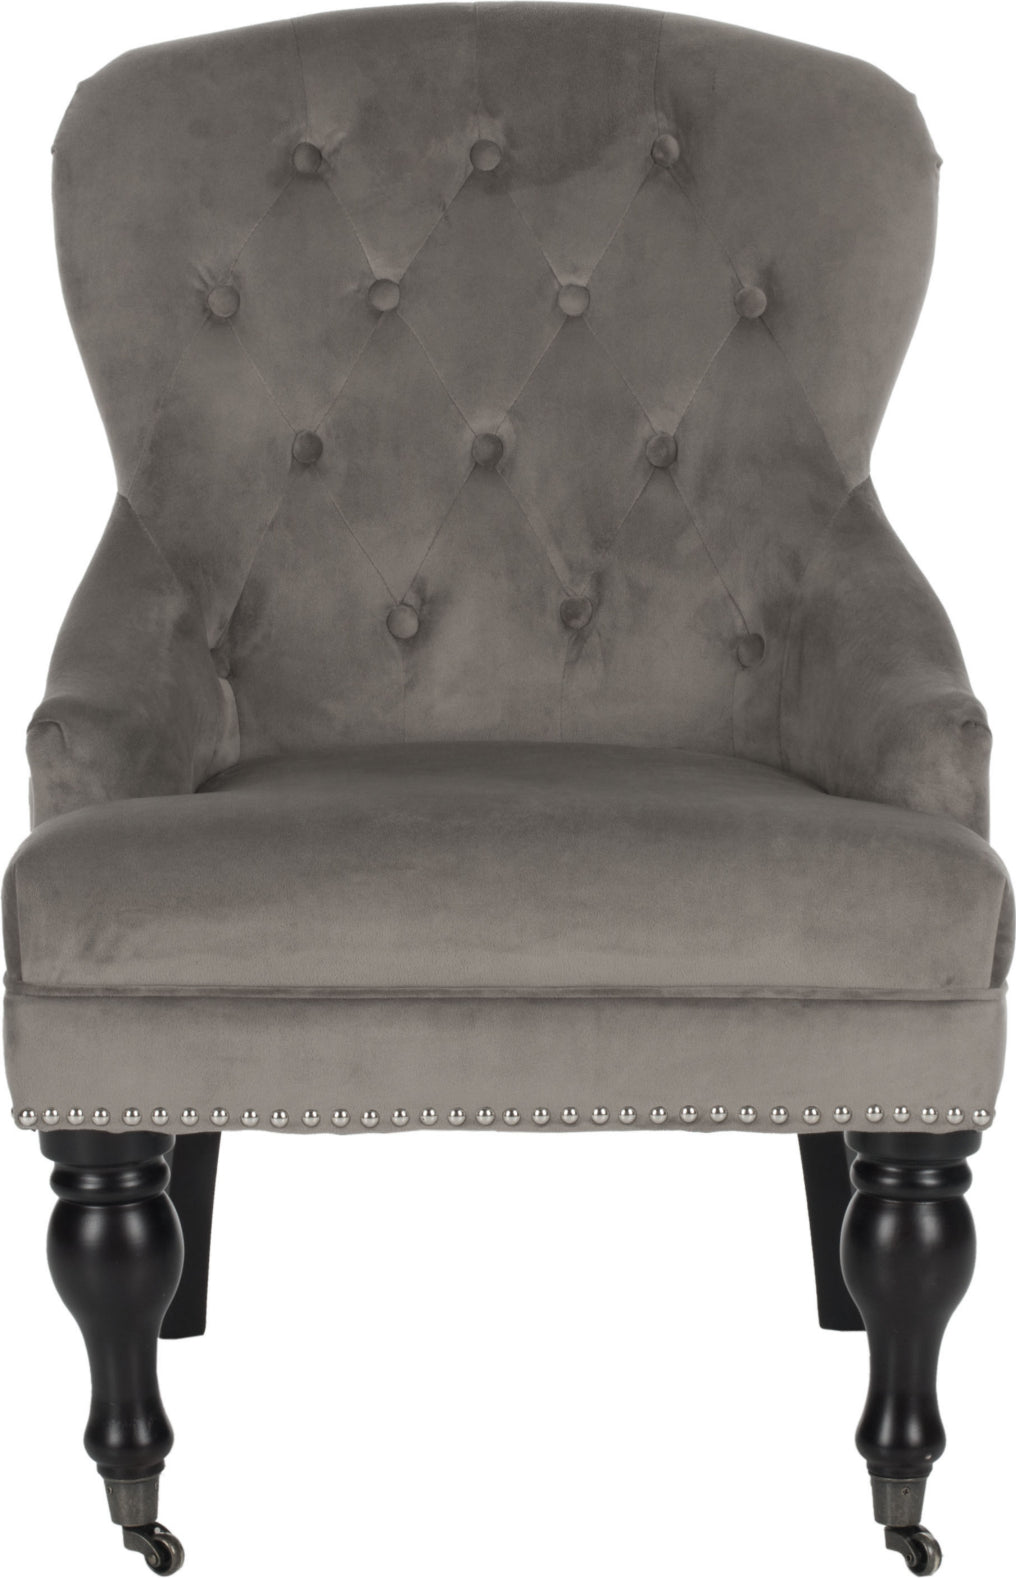 Safavieh Falcon Tufted Arm Chair With Silver Nail Heads Mushroom Taupe and Java Furniture main image